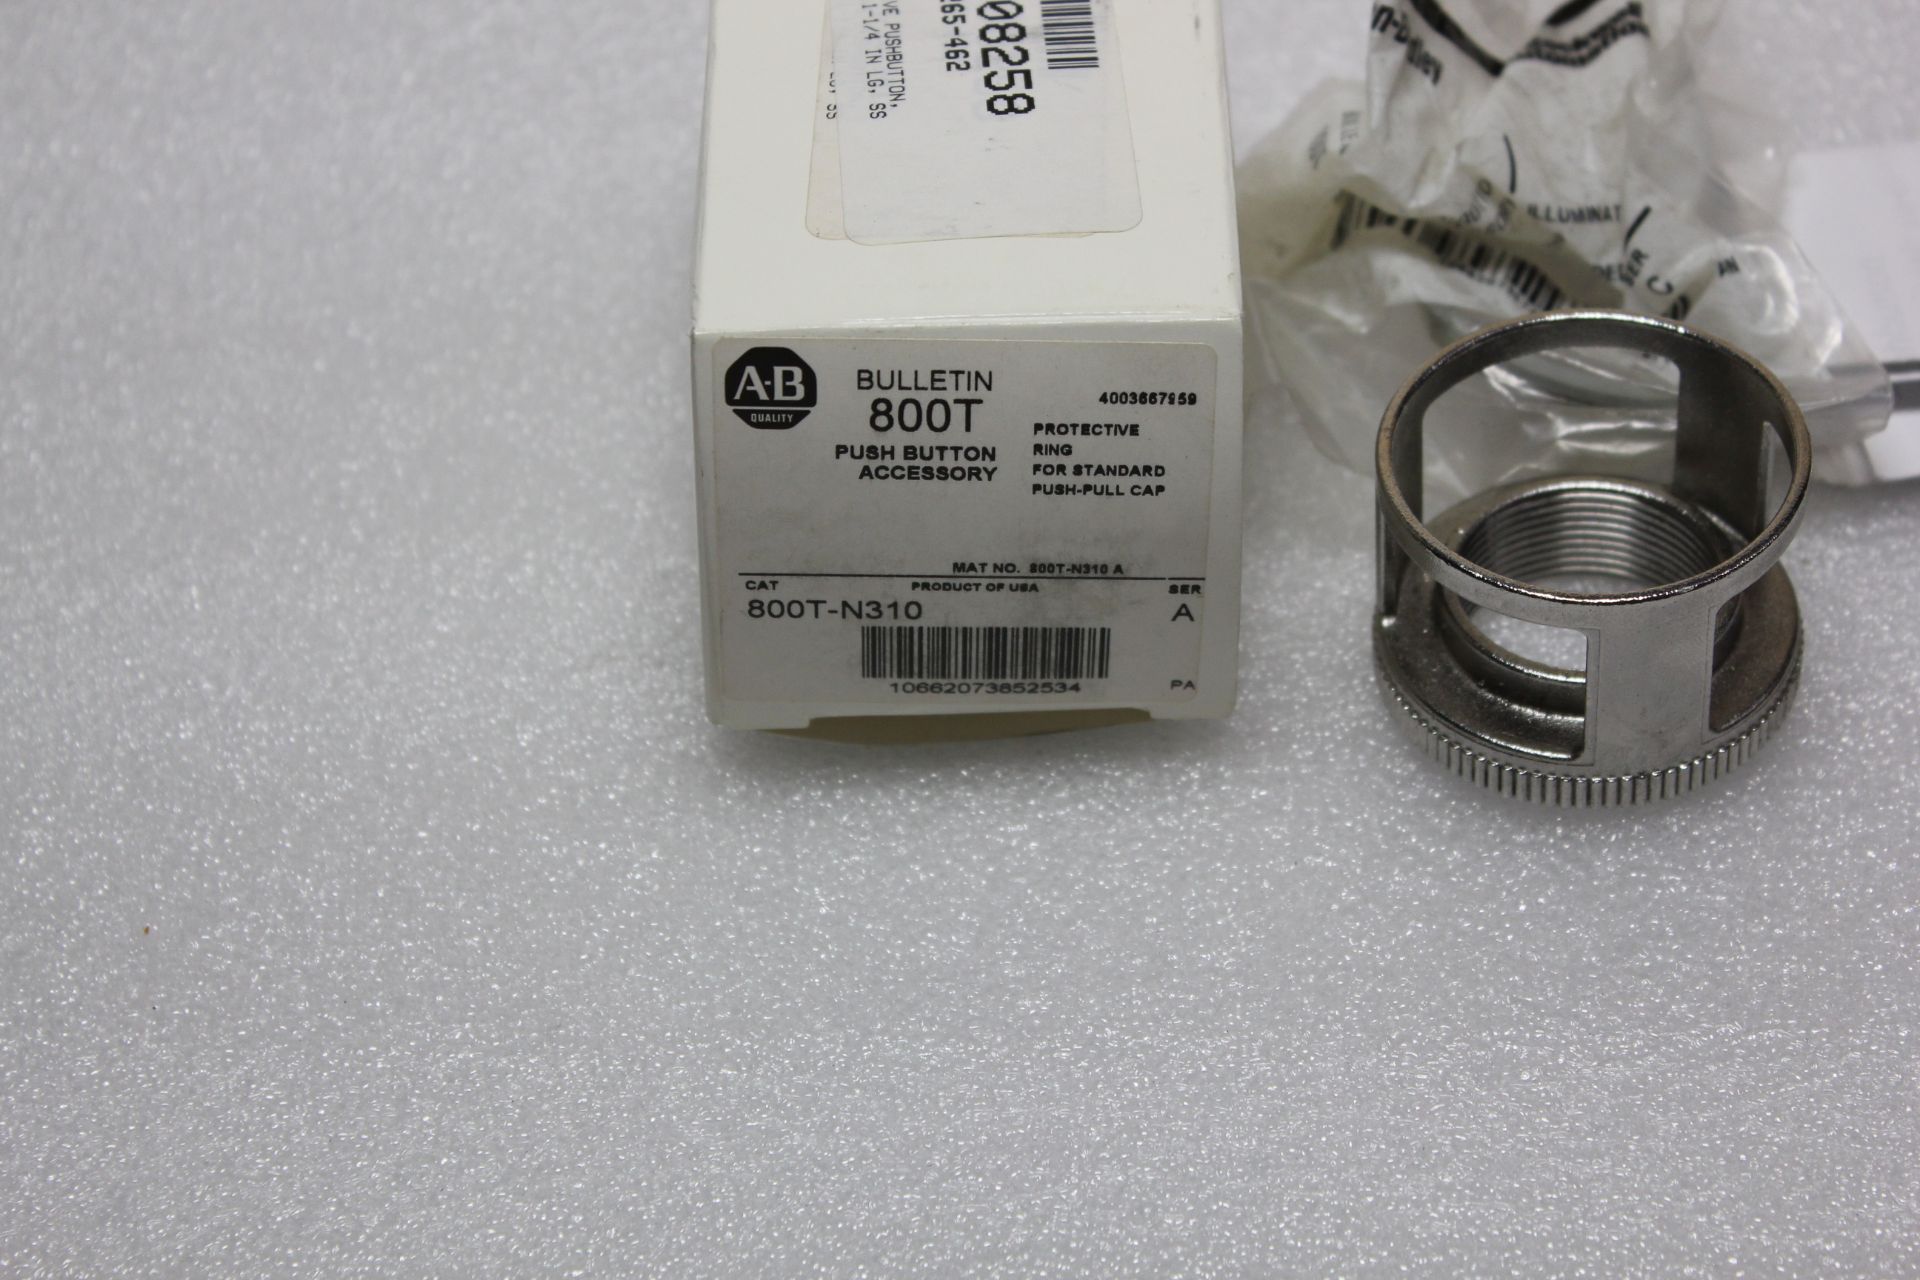 NEW ALLEN BRADLEY PUSH BUTTON PROTECTIVE RING - Image 2 of 2